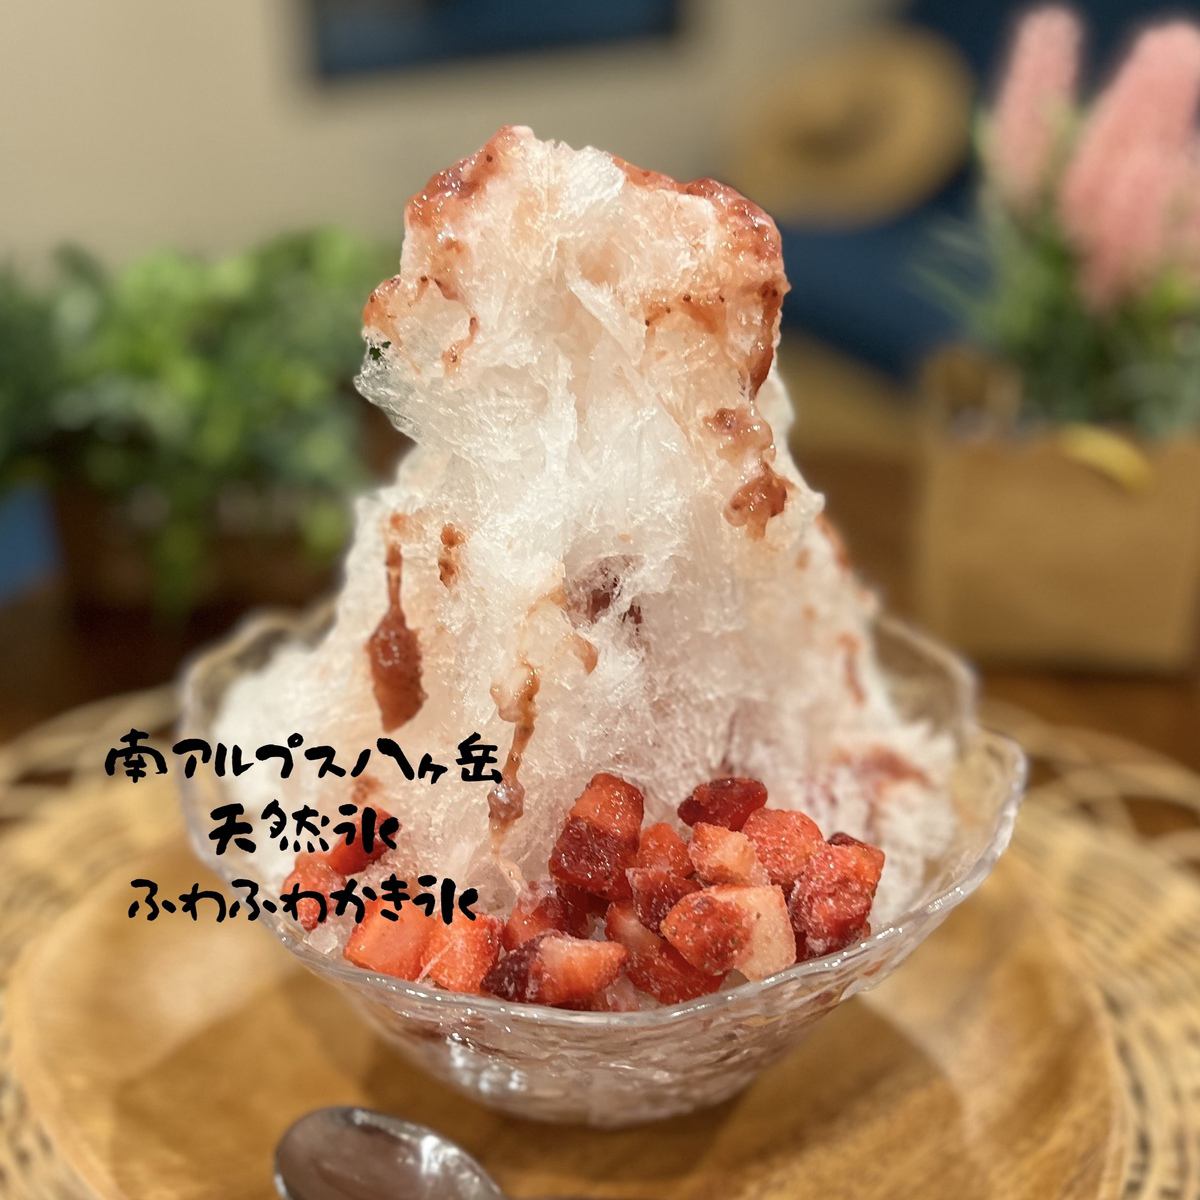 We also offer shaved ice made with natural ice during certain seasons.The natural ice we use is sourced from Yagi, a brewer in the Yatsugatake area of Minami-Alpur.